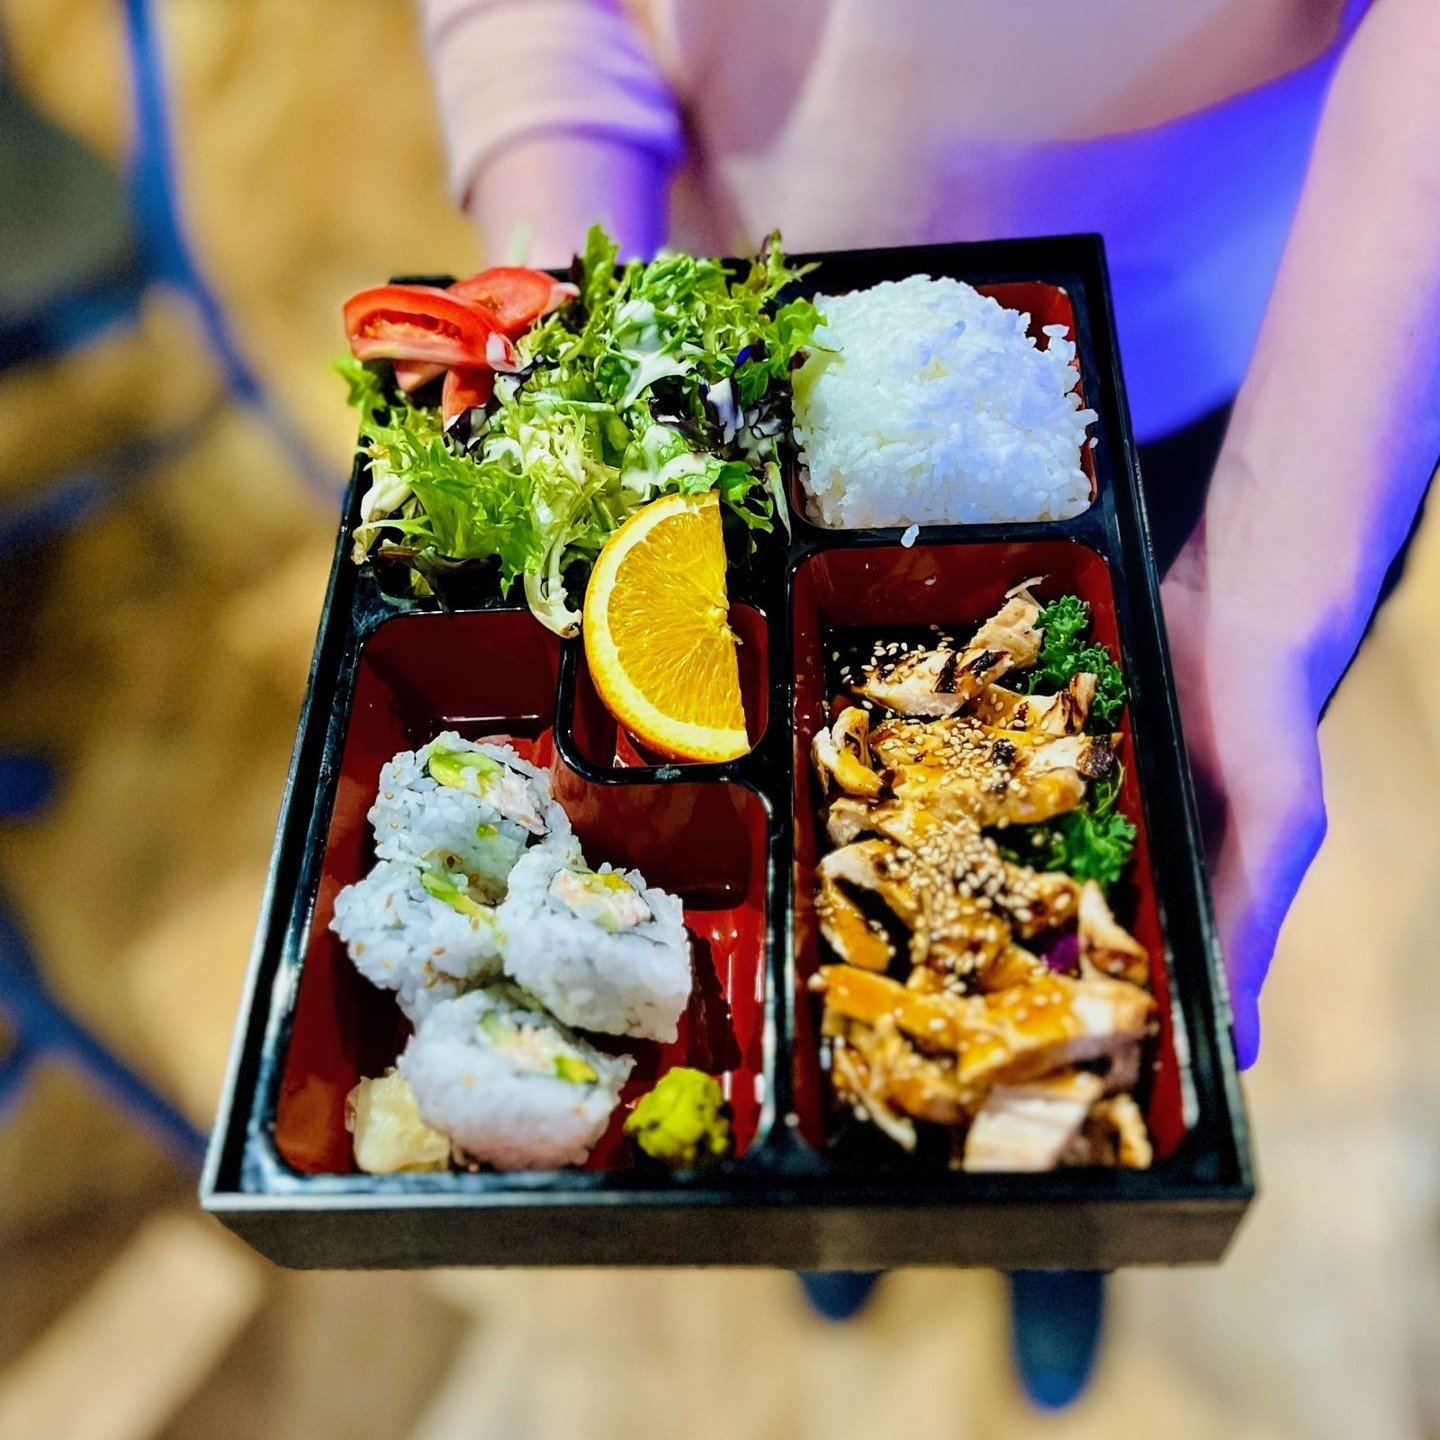 Lunch boxes aren't just for the kids anymore 🍱 Our Bento Boxes may not come with cool action figures printed on the side, but they *do* come with a balanced meal to power your PM productivity!

With 10 different assortments to choose from (including